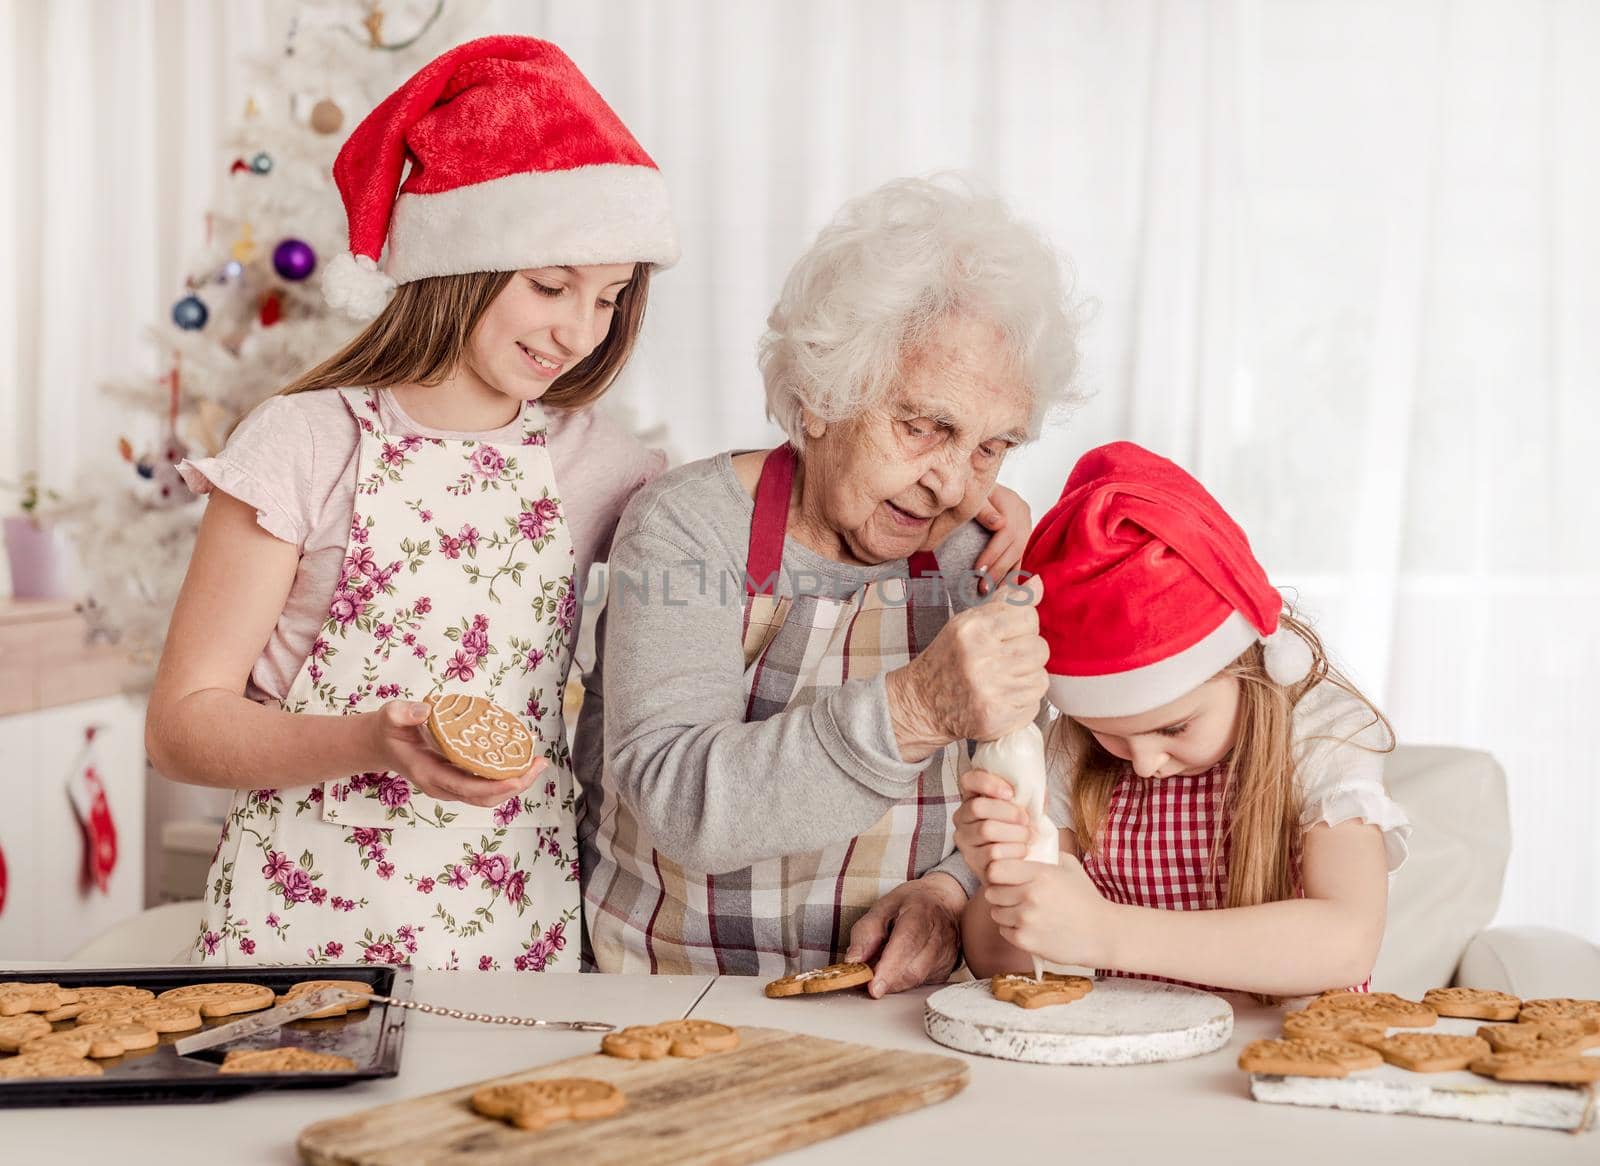 Grandmother with granddaughters in santa hats decorating cookies with cream